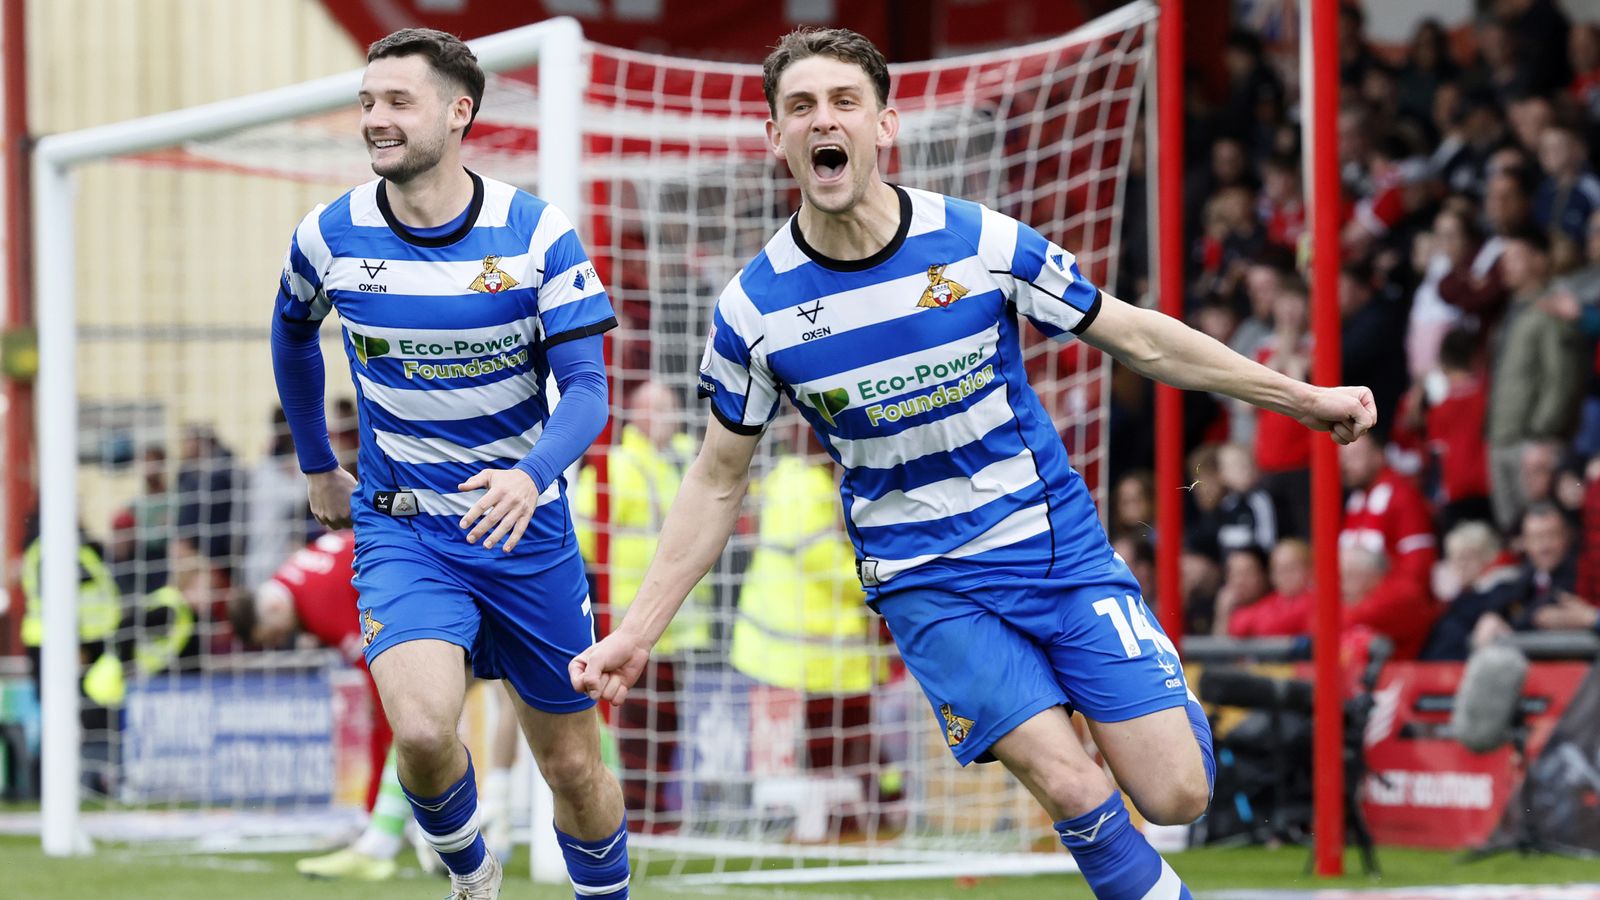 Crewe Alexandra 0-2 Doncaster Rovers: Luke Molyneux and Harrison Biggins on target in League Two play-off semi-final